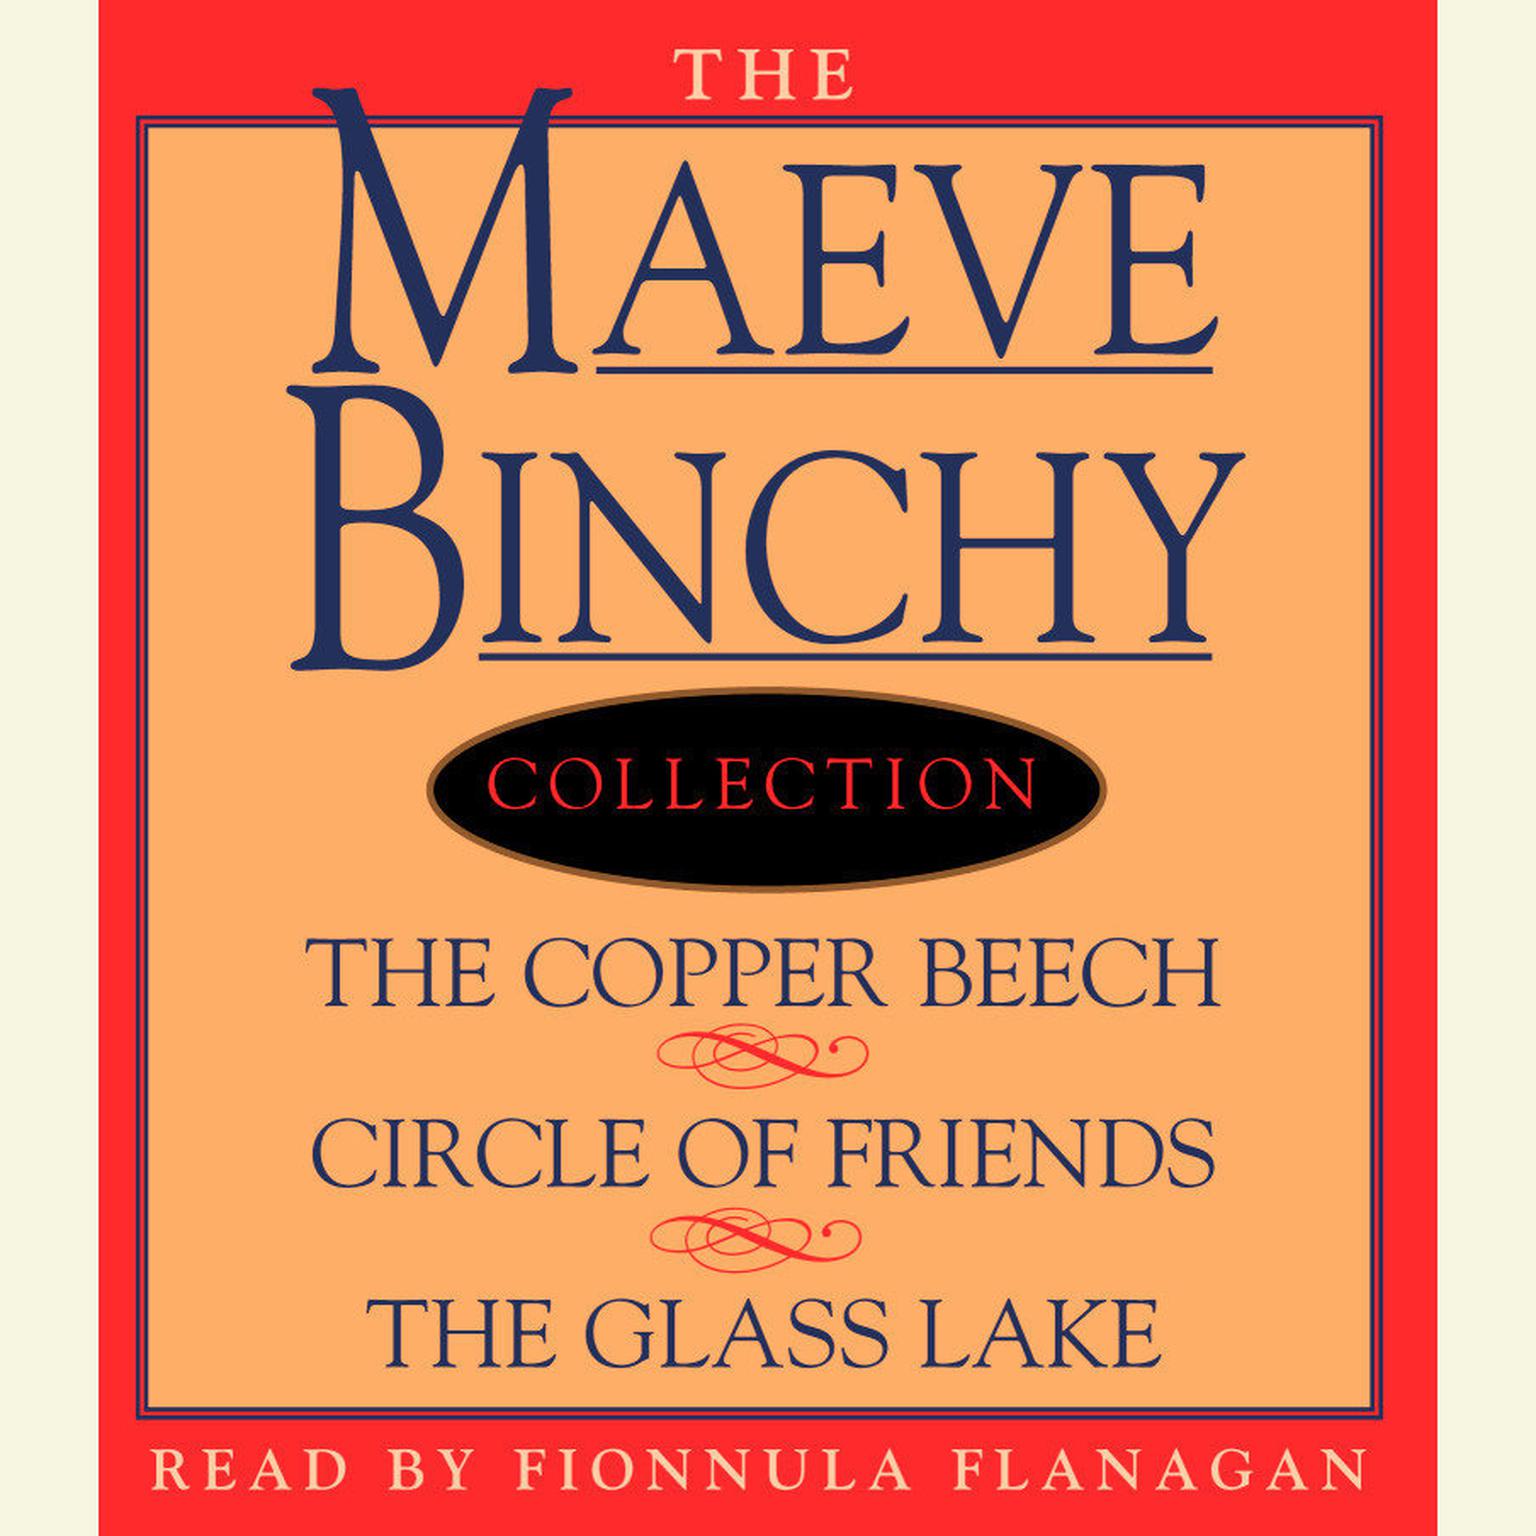 Maeve Binchy Value Collection (Abridged): The Copper Beach, Circle of Friends, The Glass Lake Audiobook, by Maeve Binchy